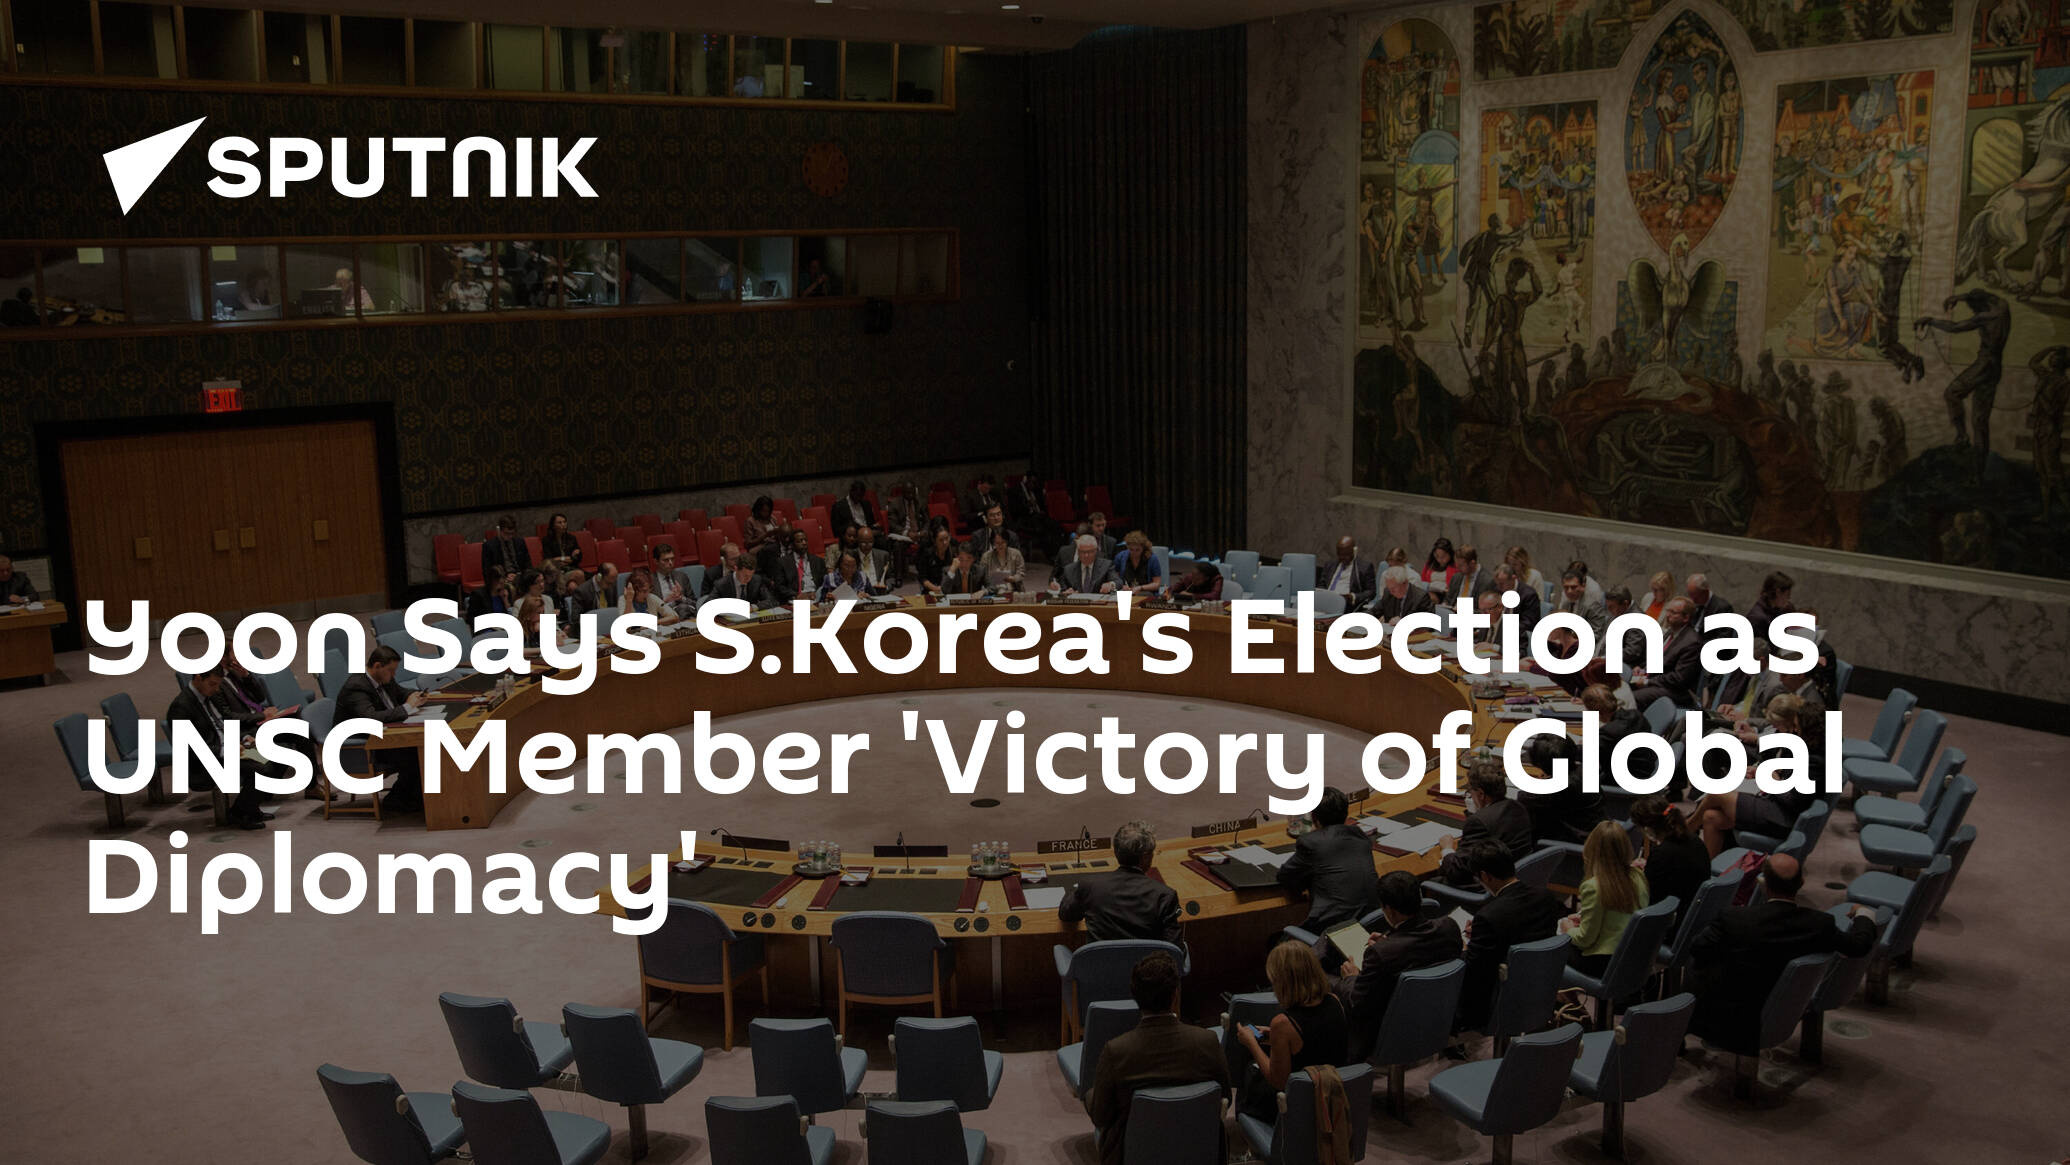 Yoon Says S.Korea's Election as UNSC Member 'Victory of Global Diplomacy'